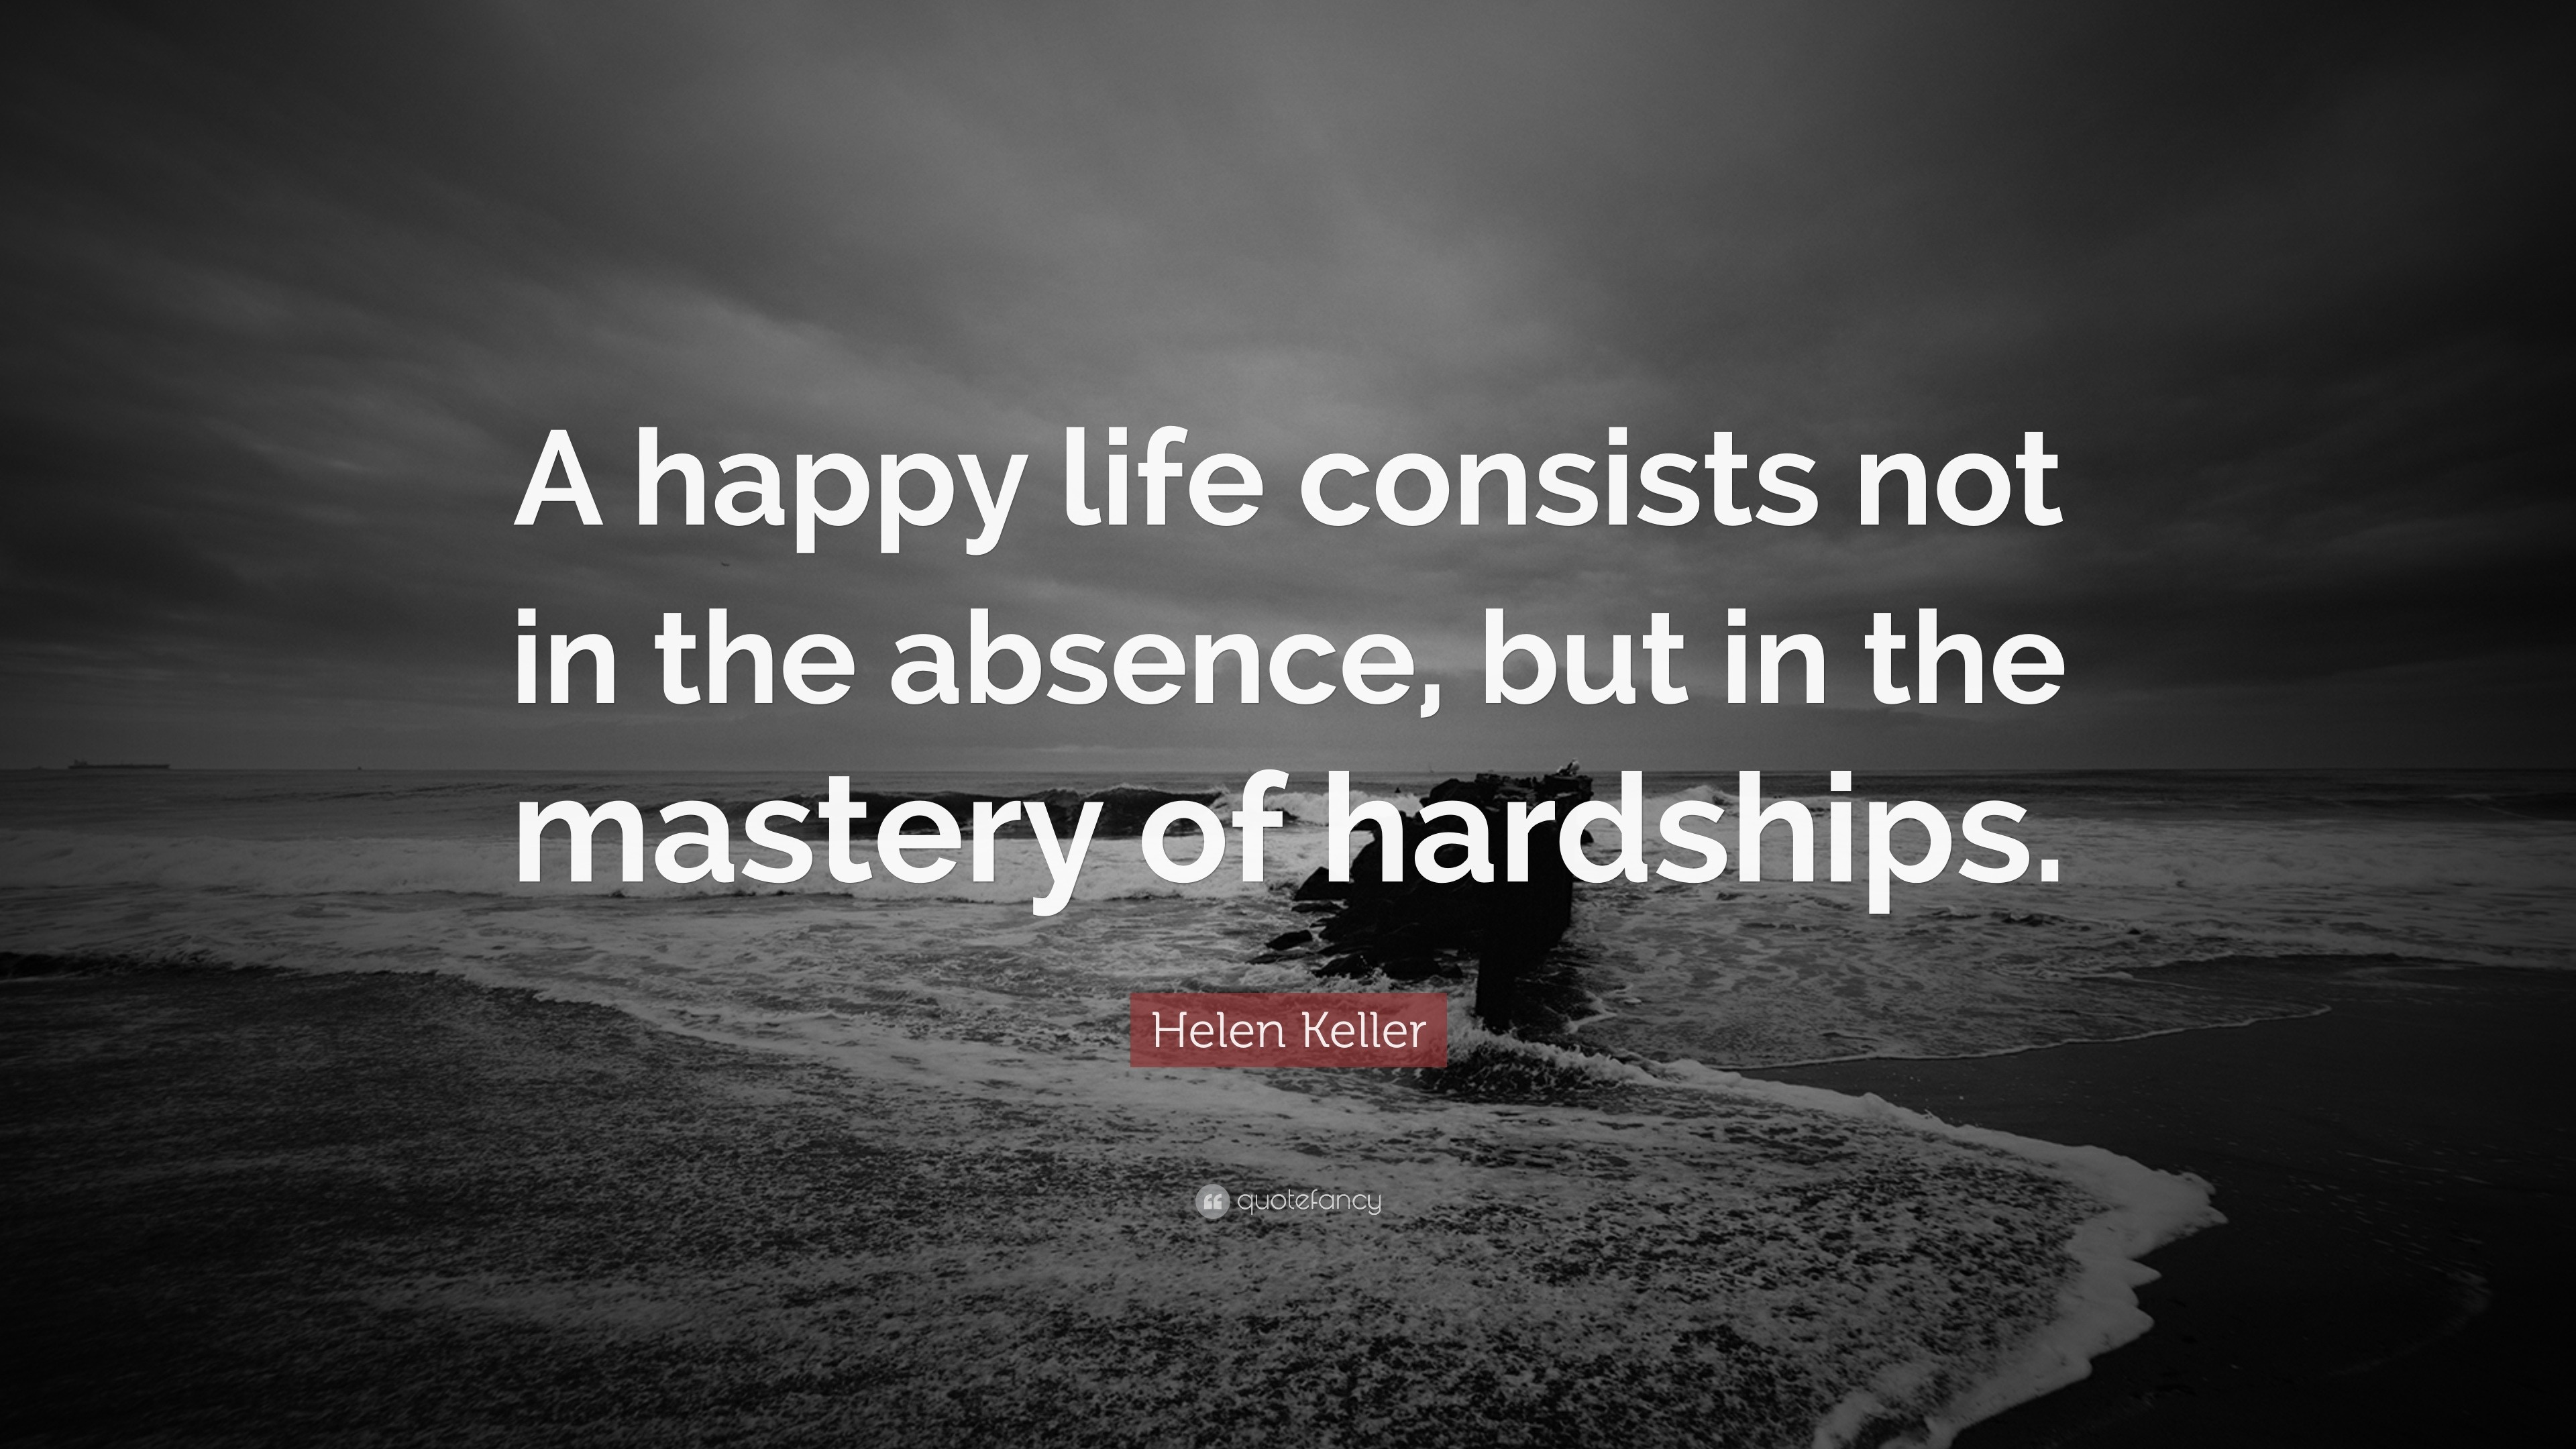 Helen Keller Quote: “A happy life consists not in the absence, but in